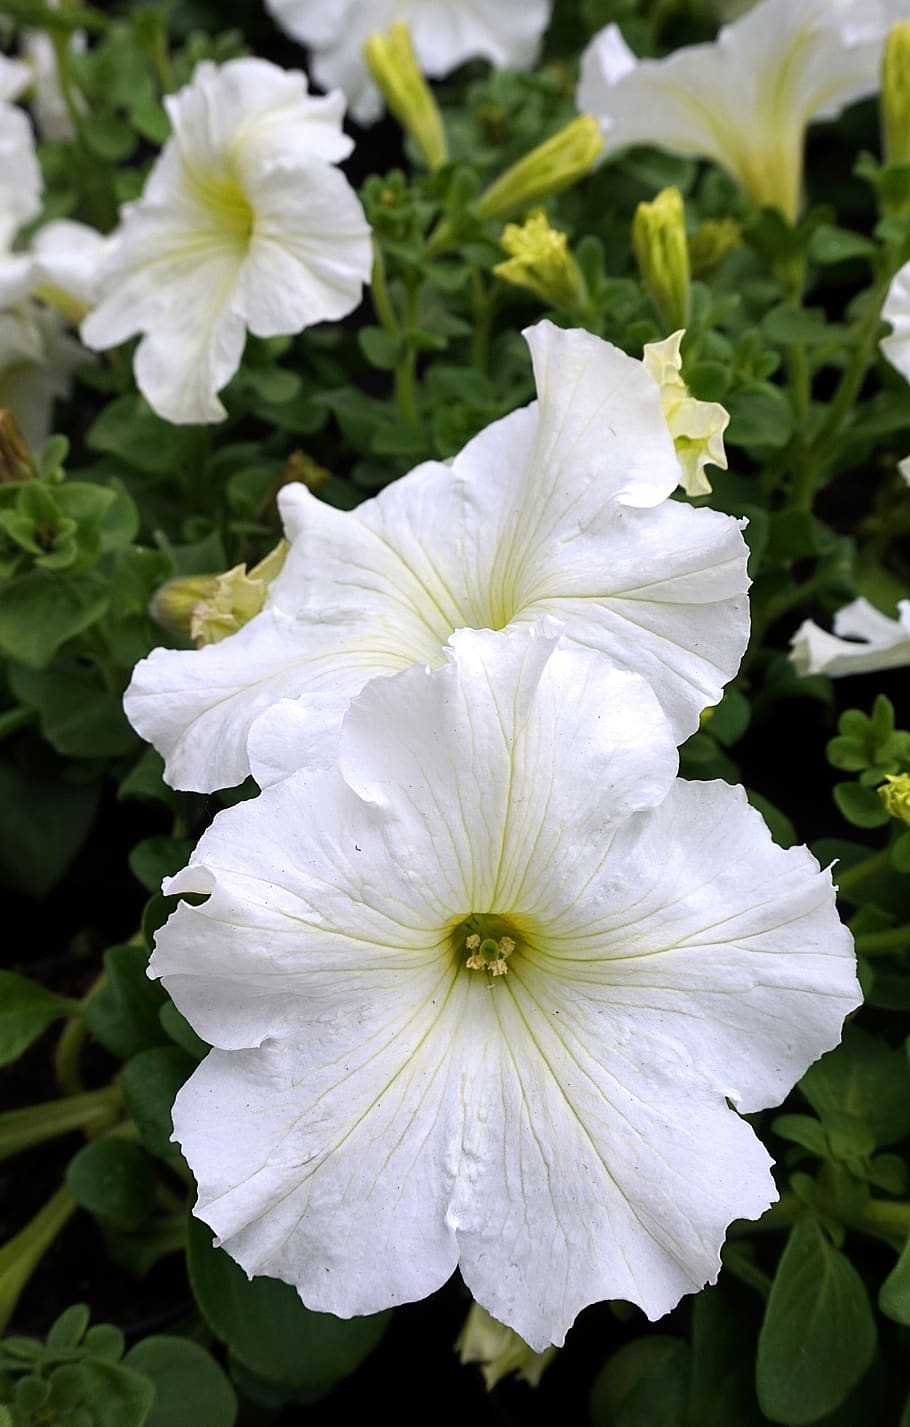 petunia, white, blossom, bloom, flower, garden petunia, flowering plant, fragility, beauty in nature, vulnerability